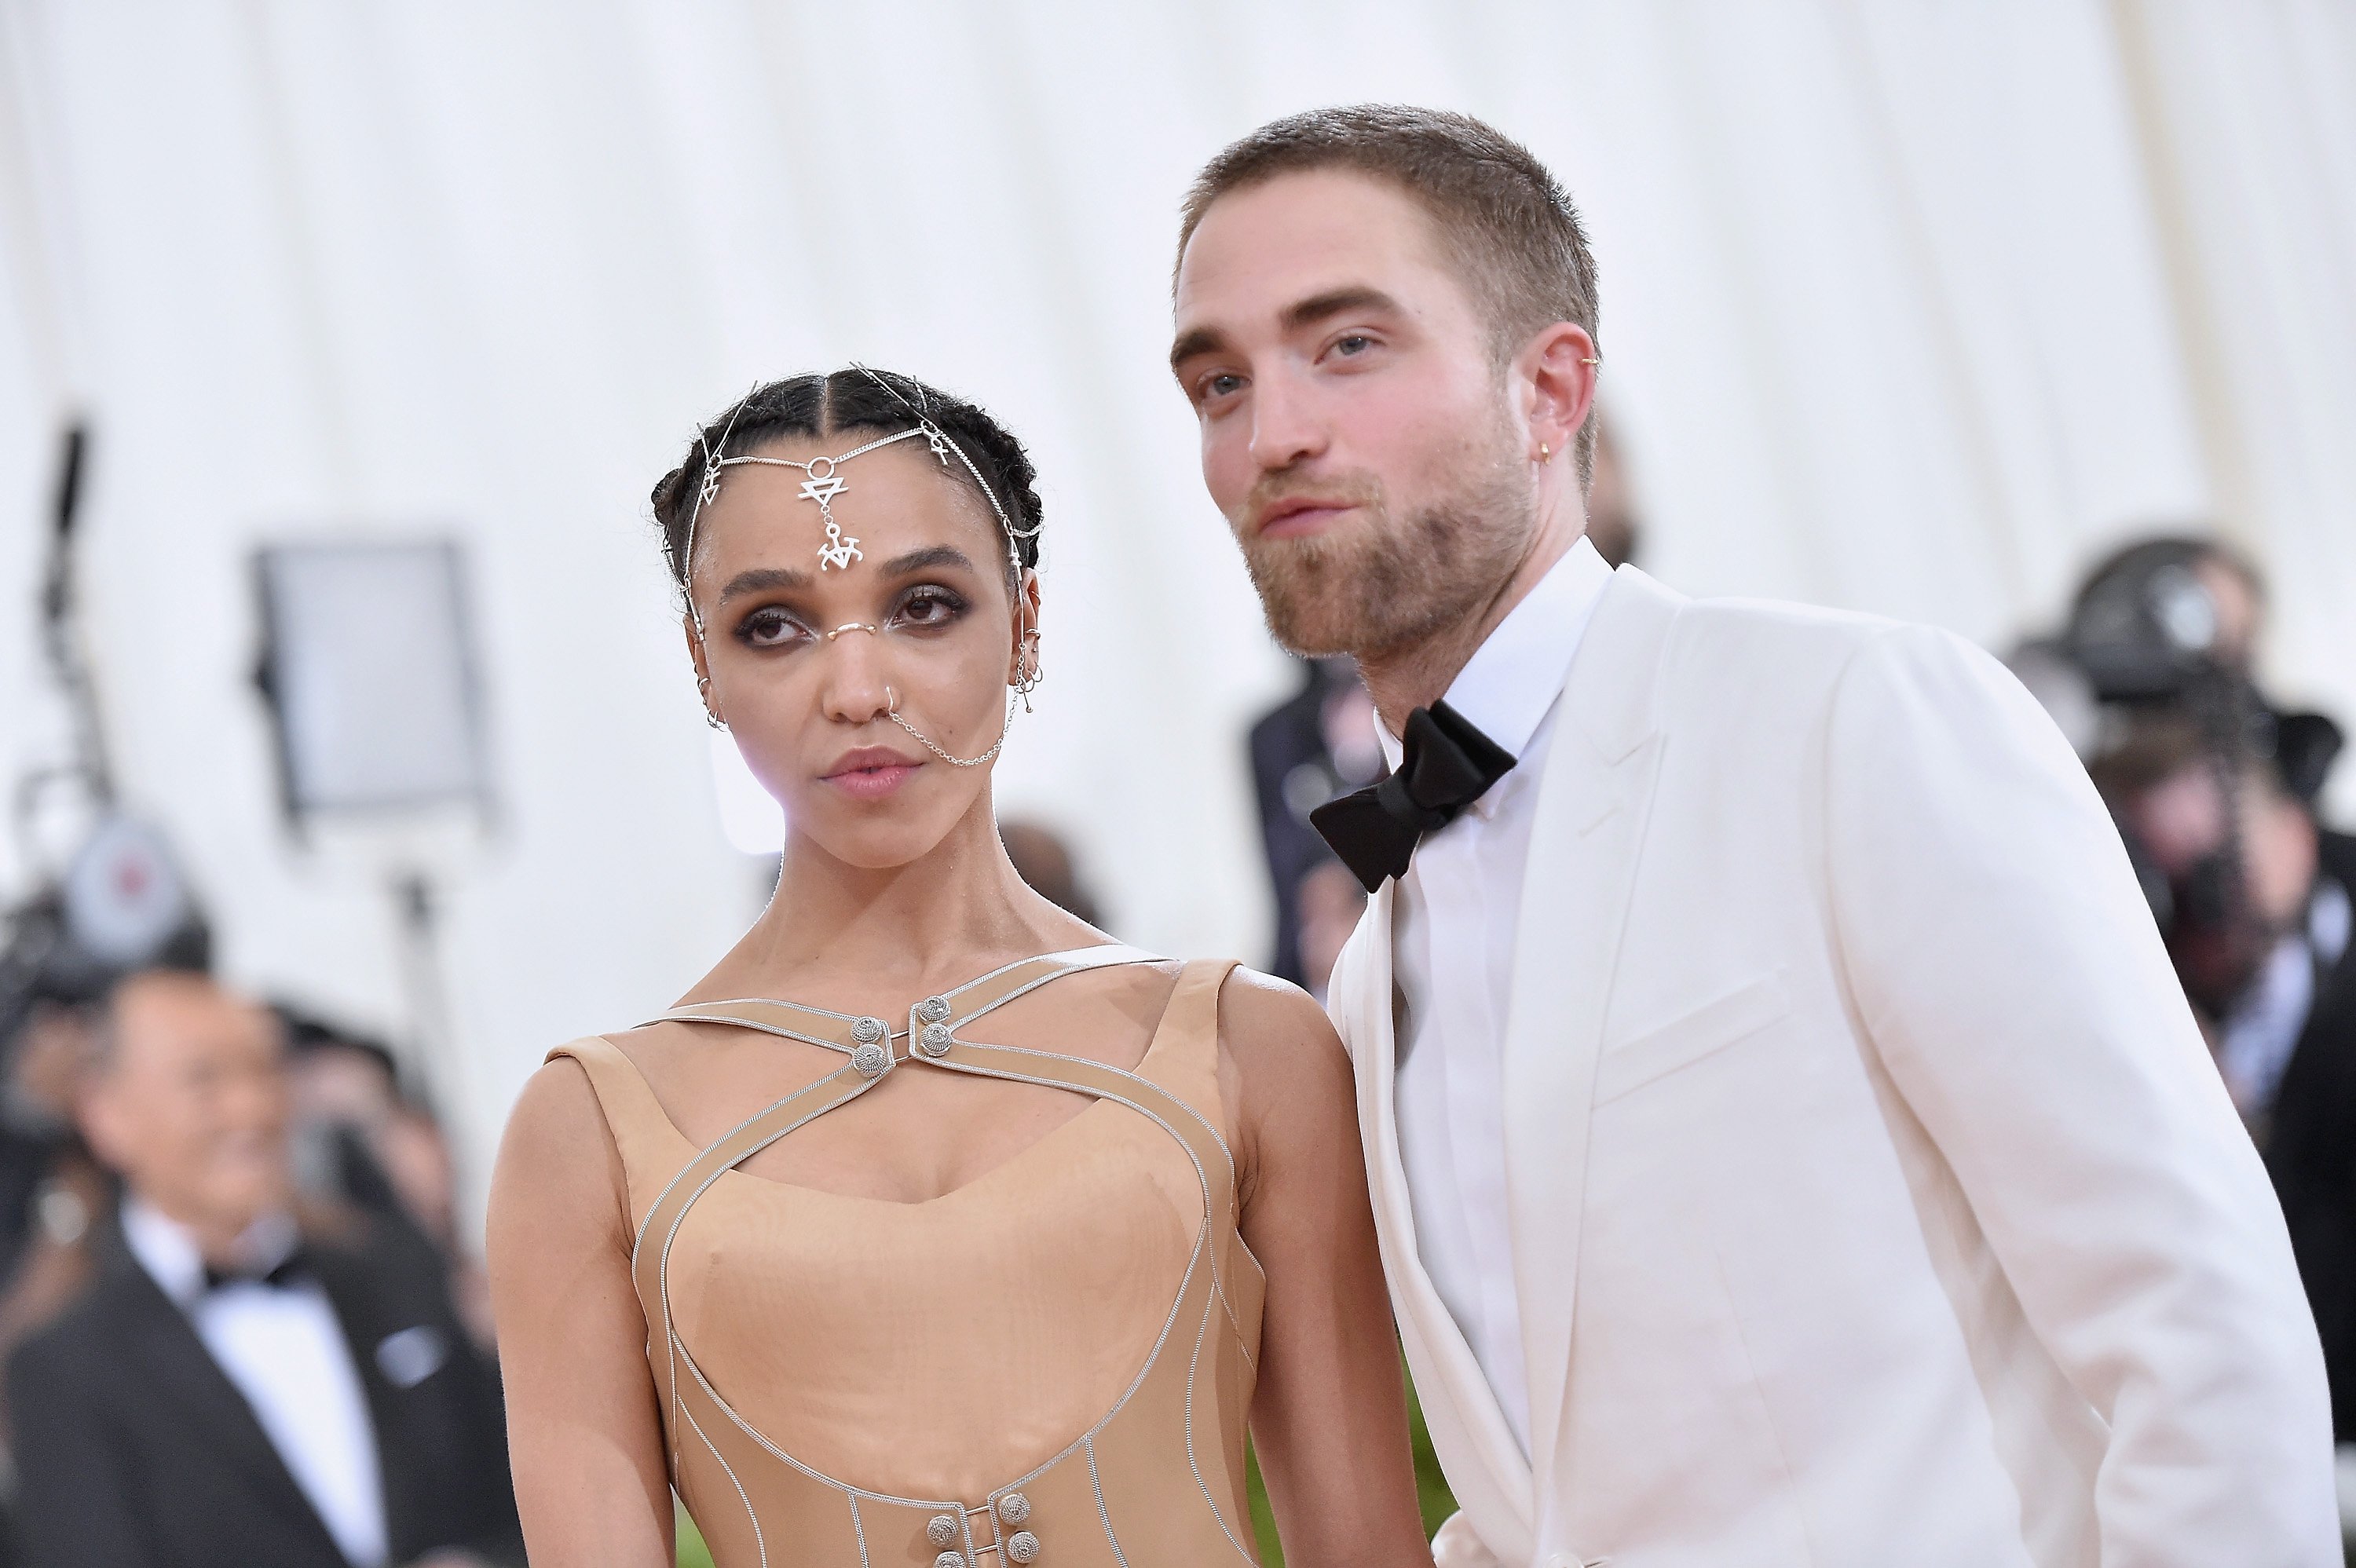 FKA twigs and Robert Pattinson attend the "Manus x Machina: Fashion In An Age Of Technology" Costume Institute Gala at Metropolitan Museum of Art on May 2, 2016 in New York City. | Source: Getty Image